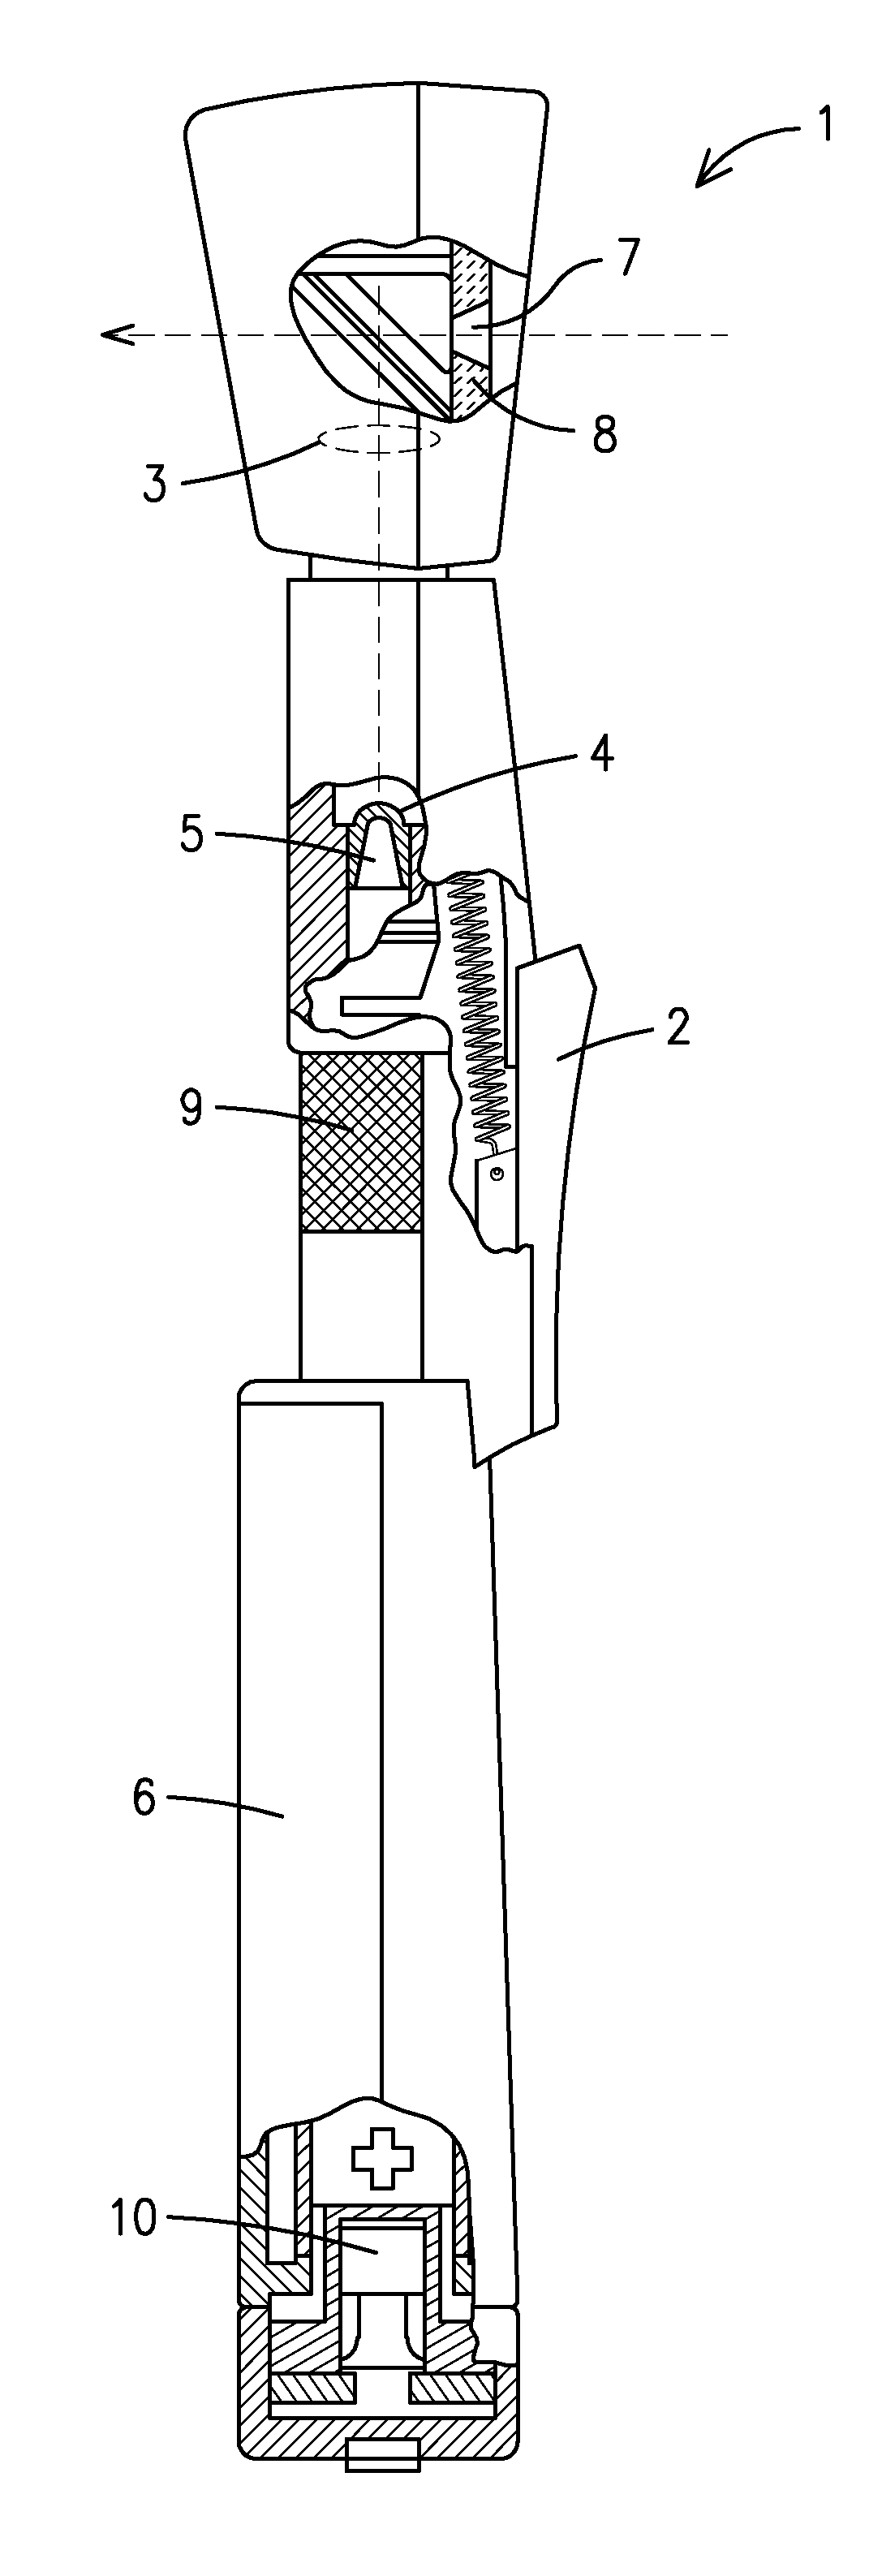 Device and method for calibrating retinoscopes